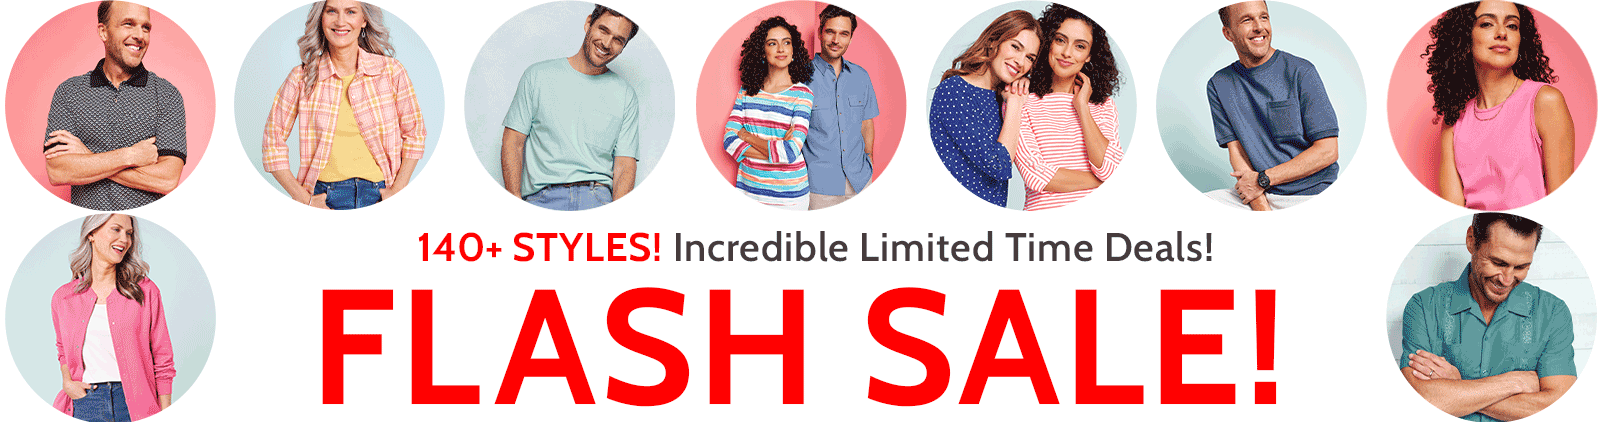 140+ styles! incredible limited time deals! flash sale! 